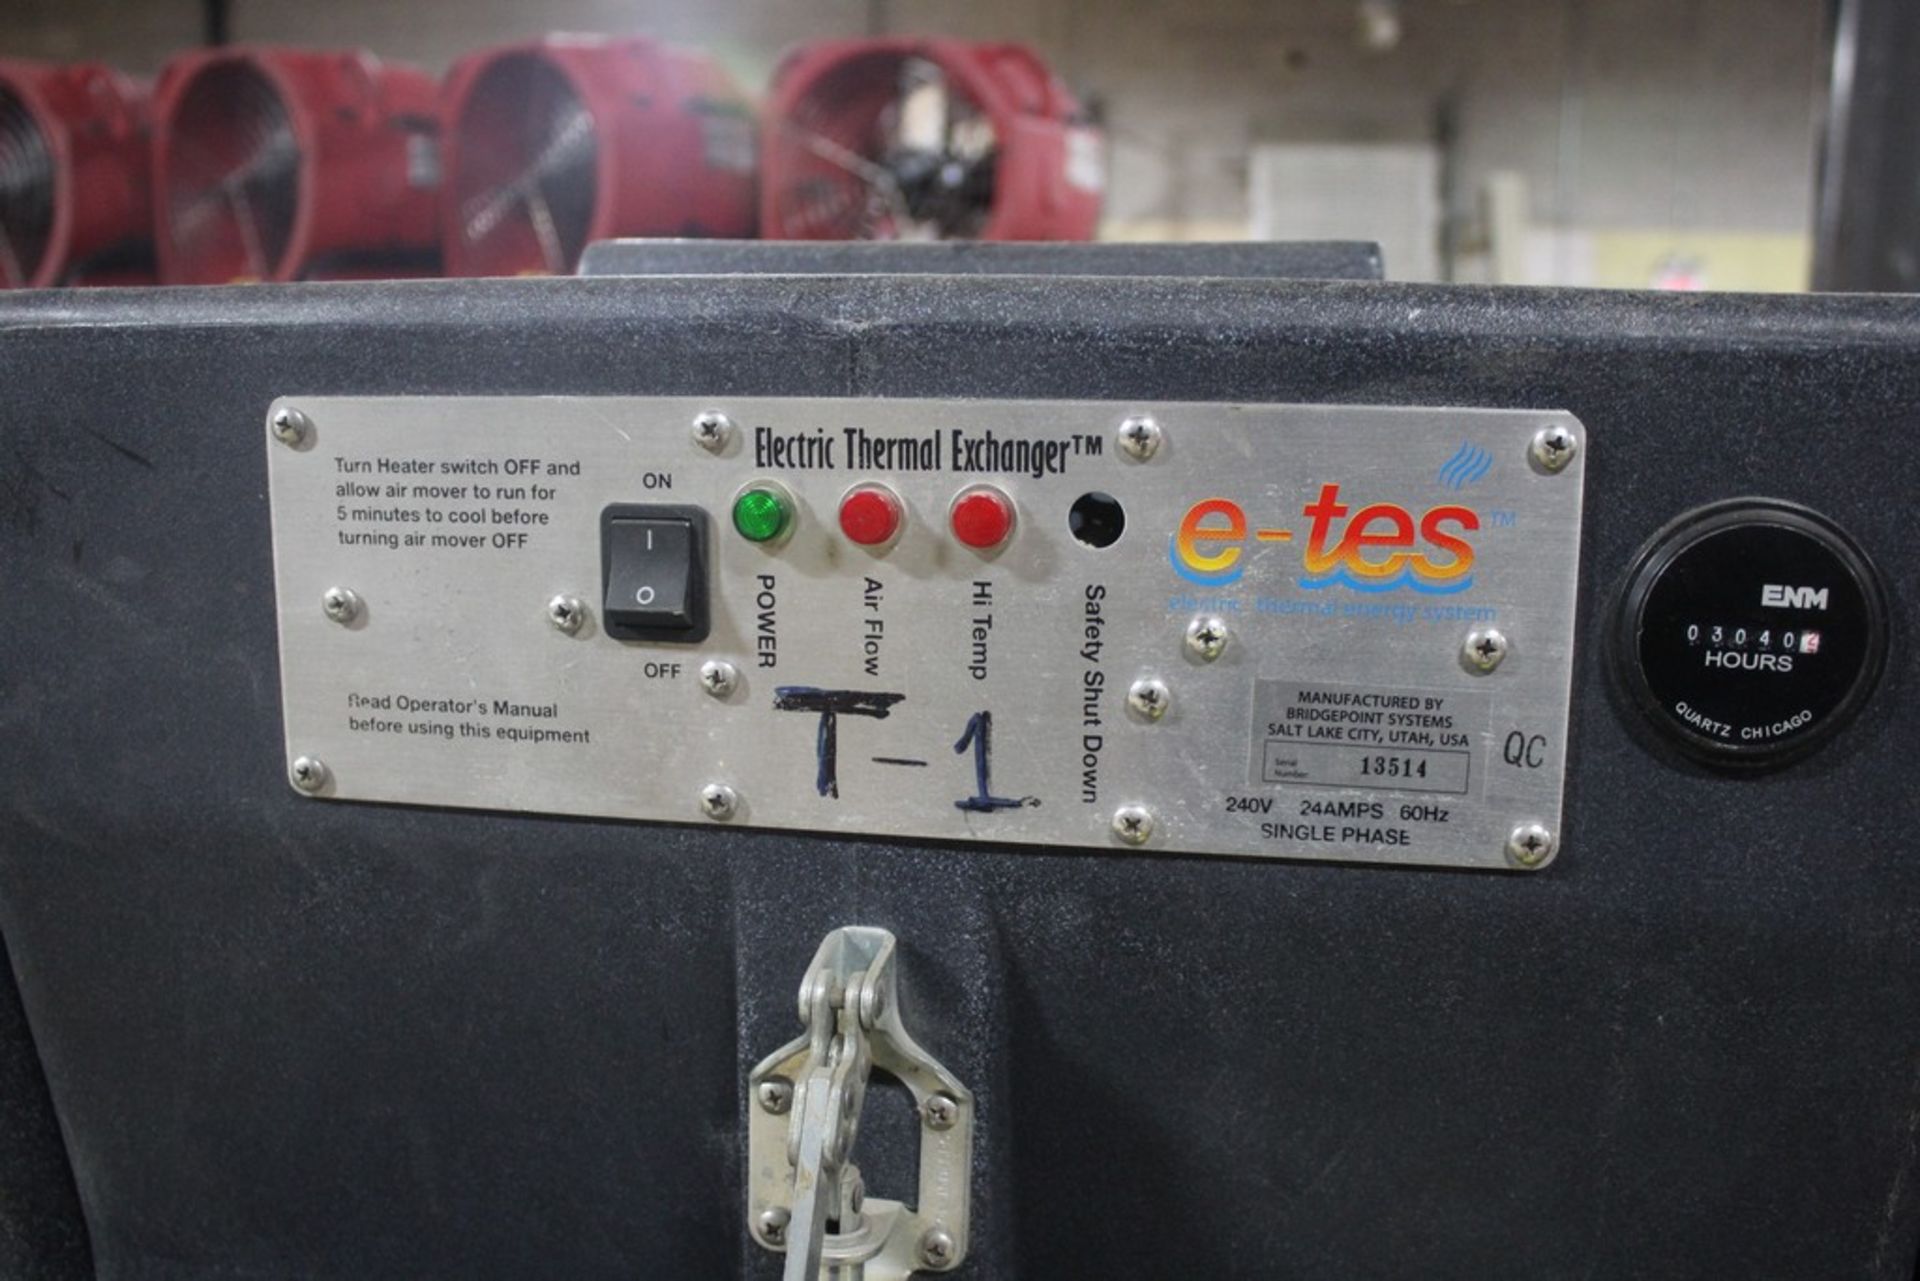 TES E-ETS ELECTRIC THERMAL EXCHANGER - 240 V - Image 2 of 2